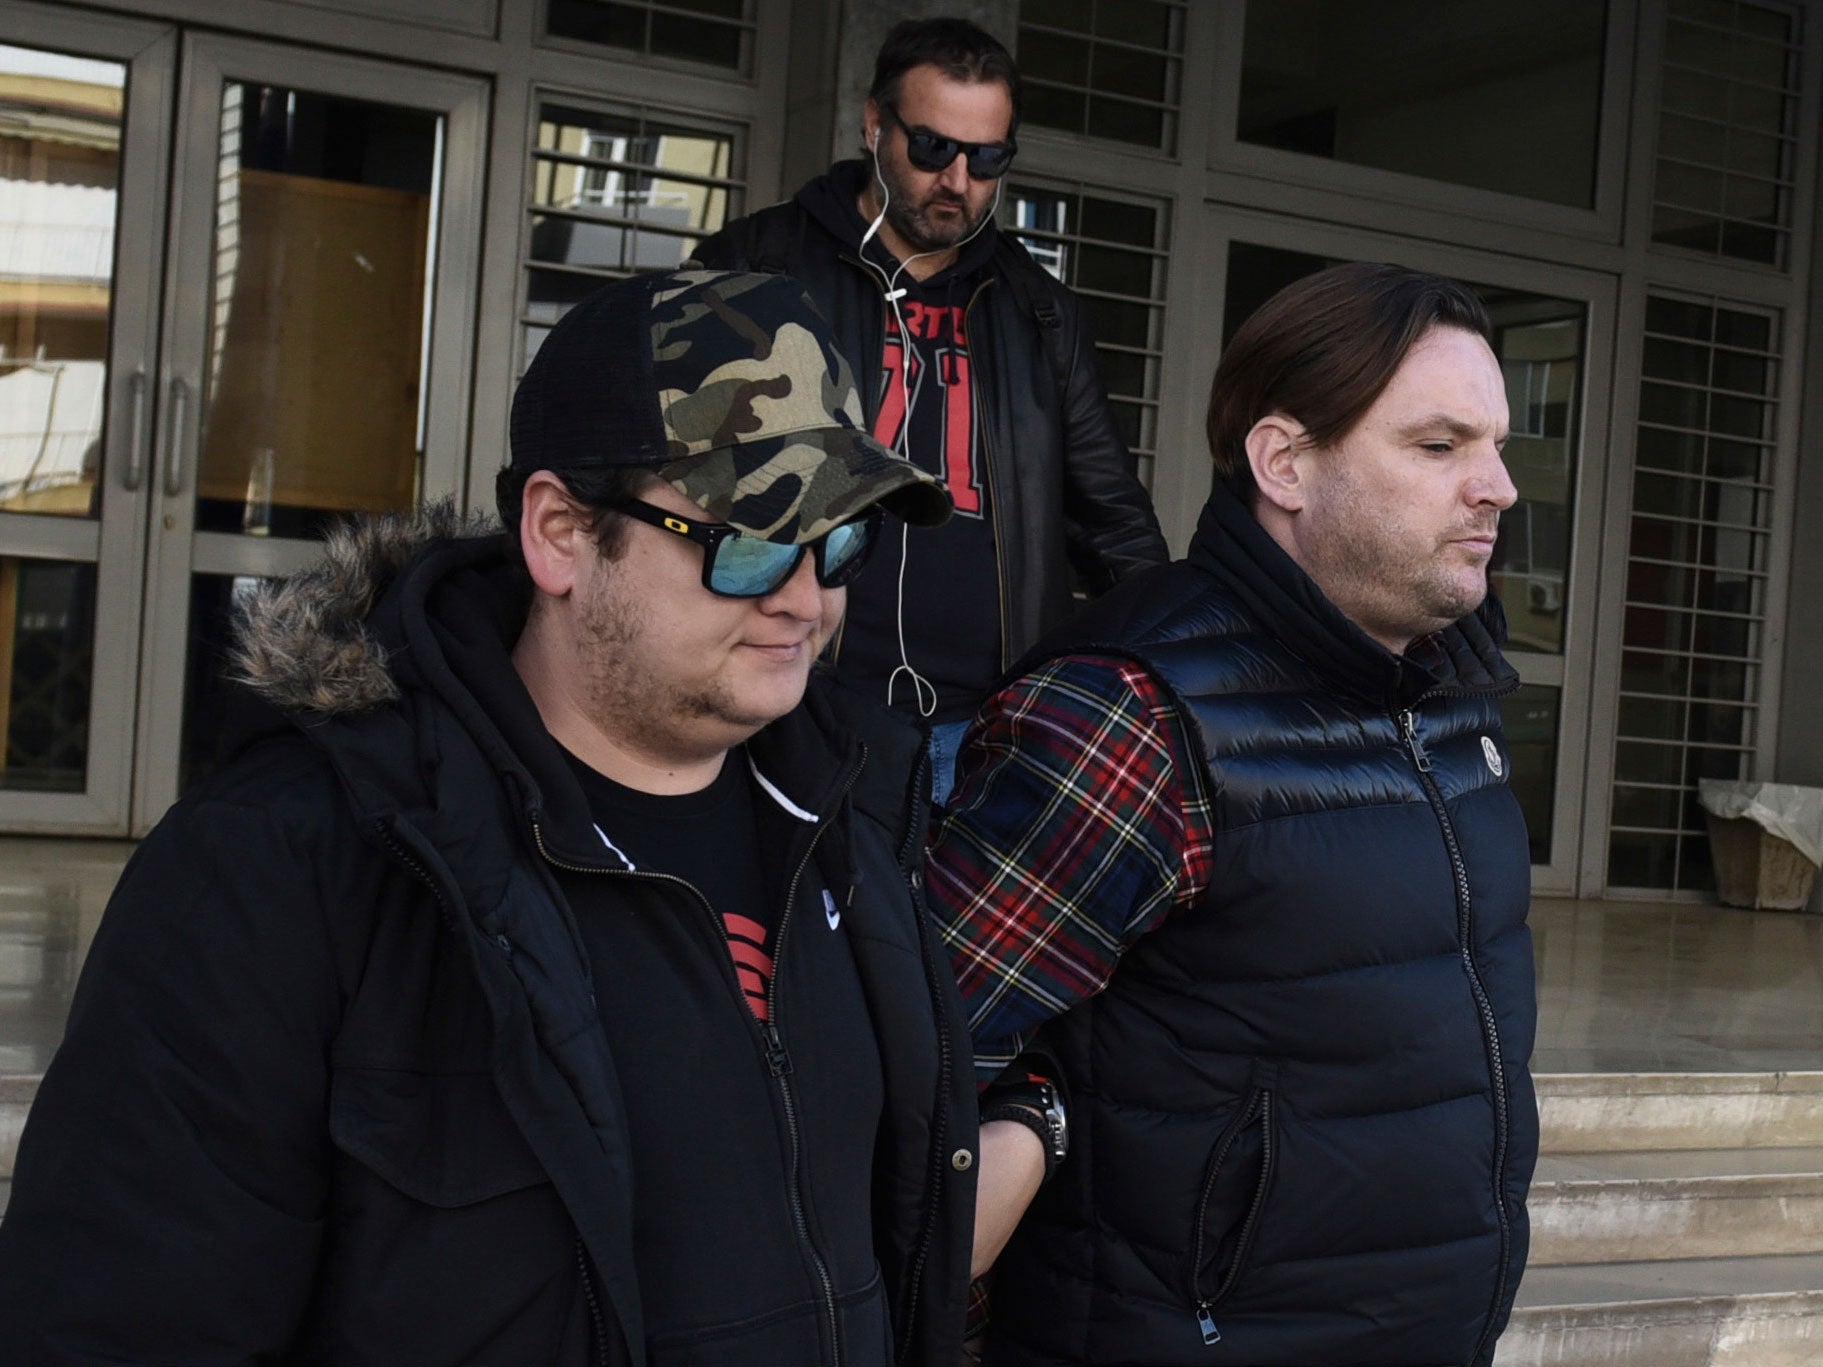 Simon Dutton, 39, right, is escorted by police officers as he leaves a courthouse at the northern Greek city of Thessaloniki